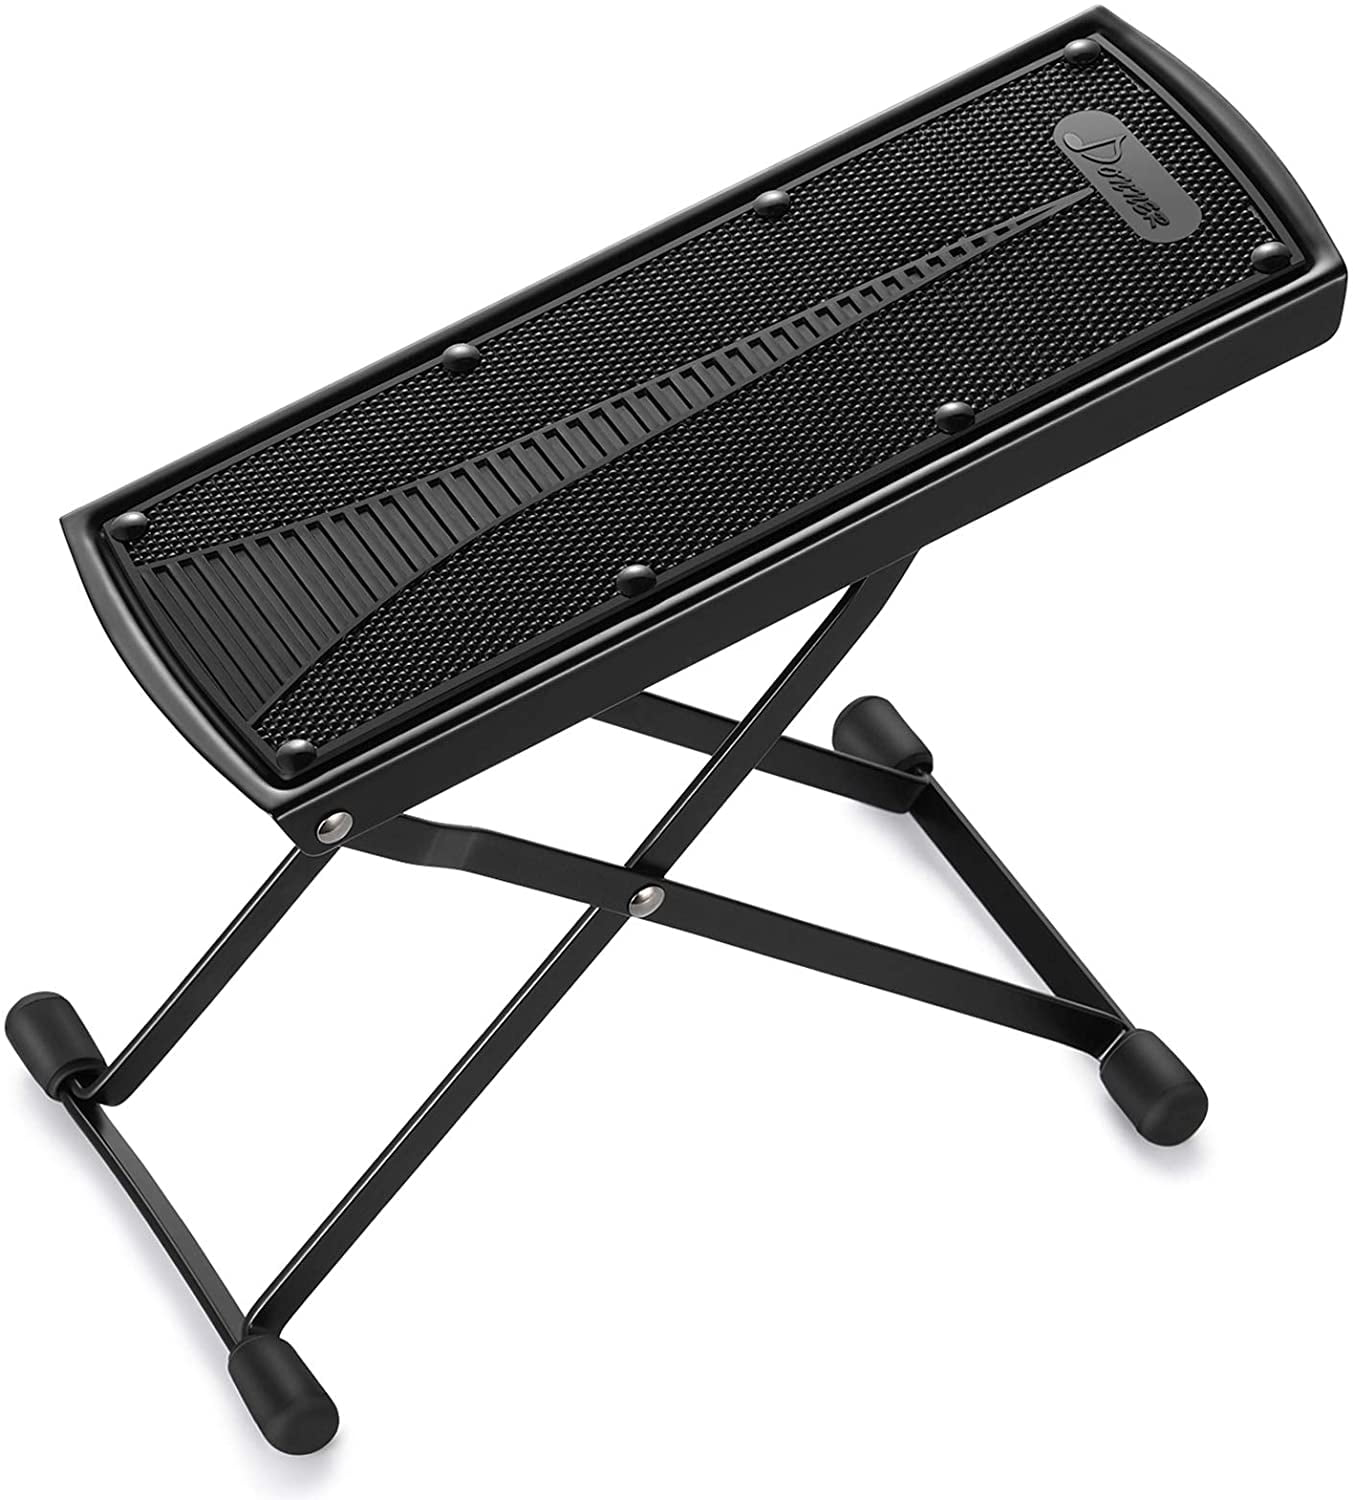 Guitar Foot Pedal, Guitar Foot Stool 4 Gears High And Low Folding, Sturdy  Metal Foot Rest